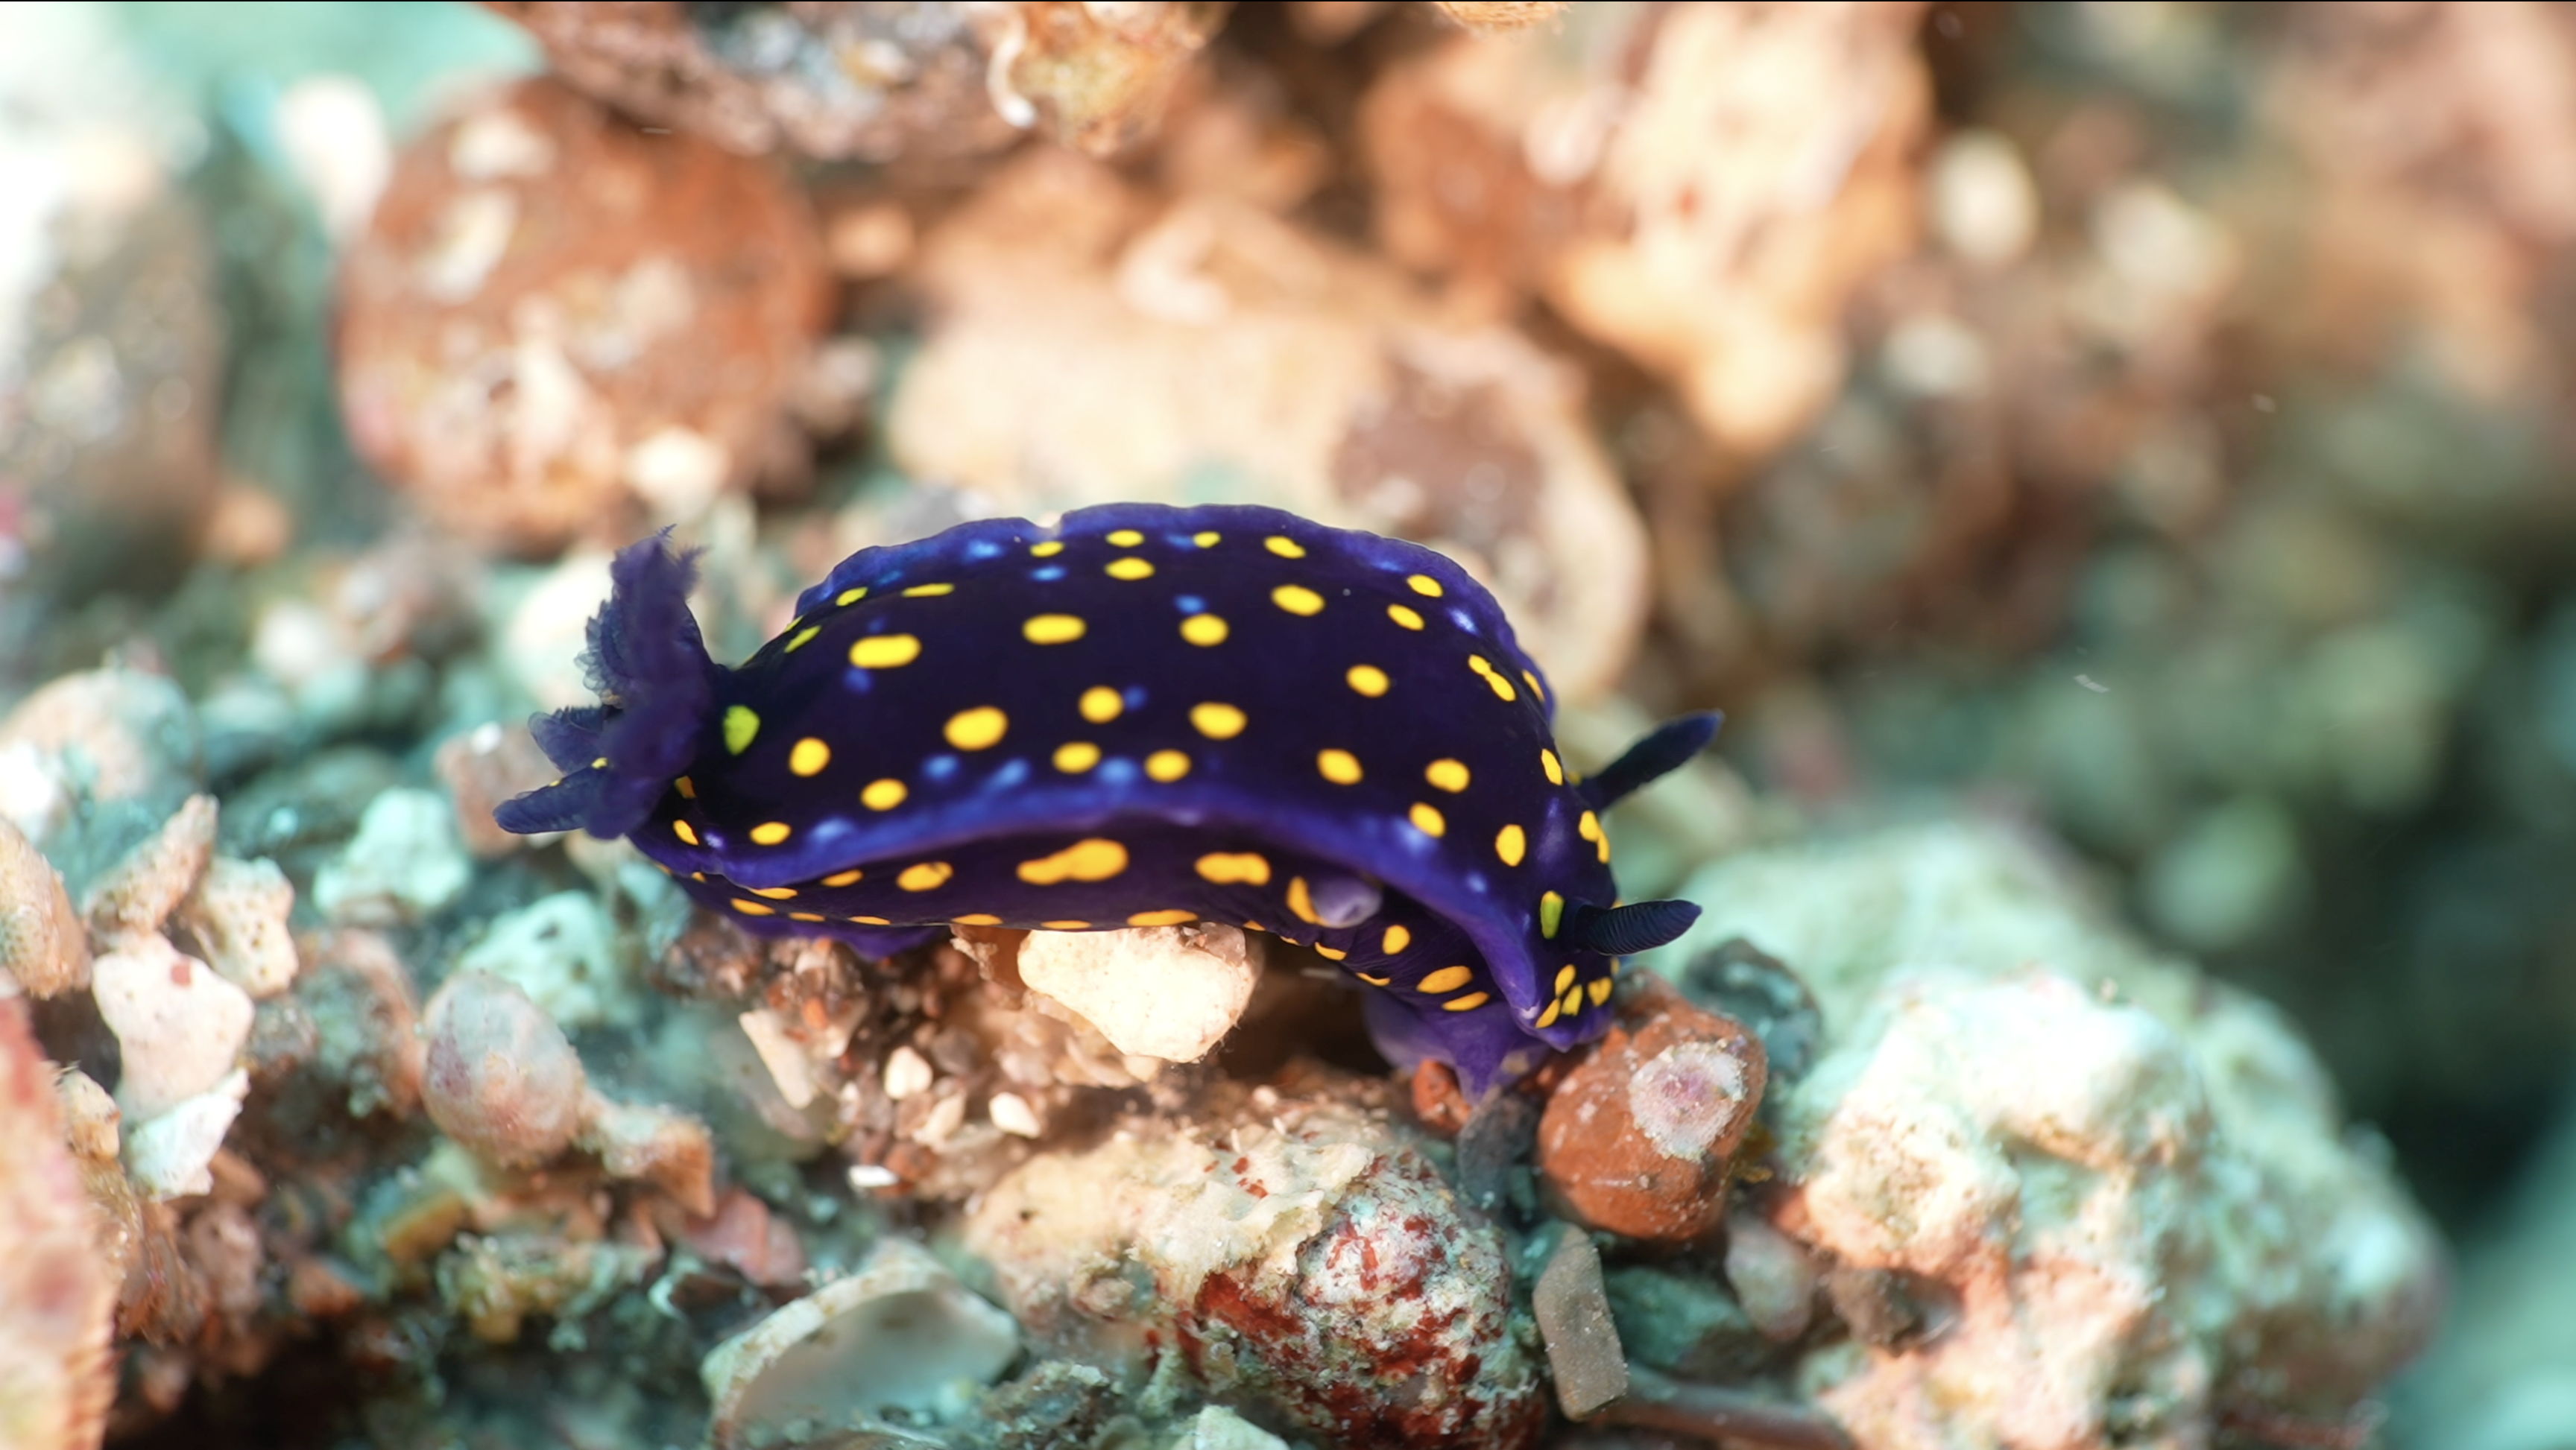  Sea of Cortez: The California blue dorid, originally found in the Eastern Pacific Ocean along the California coast from Monterey Bay through Baja, became regionally extinct in the northern part of its range, disappearing completely by 1984. In 2003, it began to reappear. 